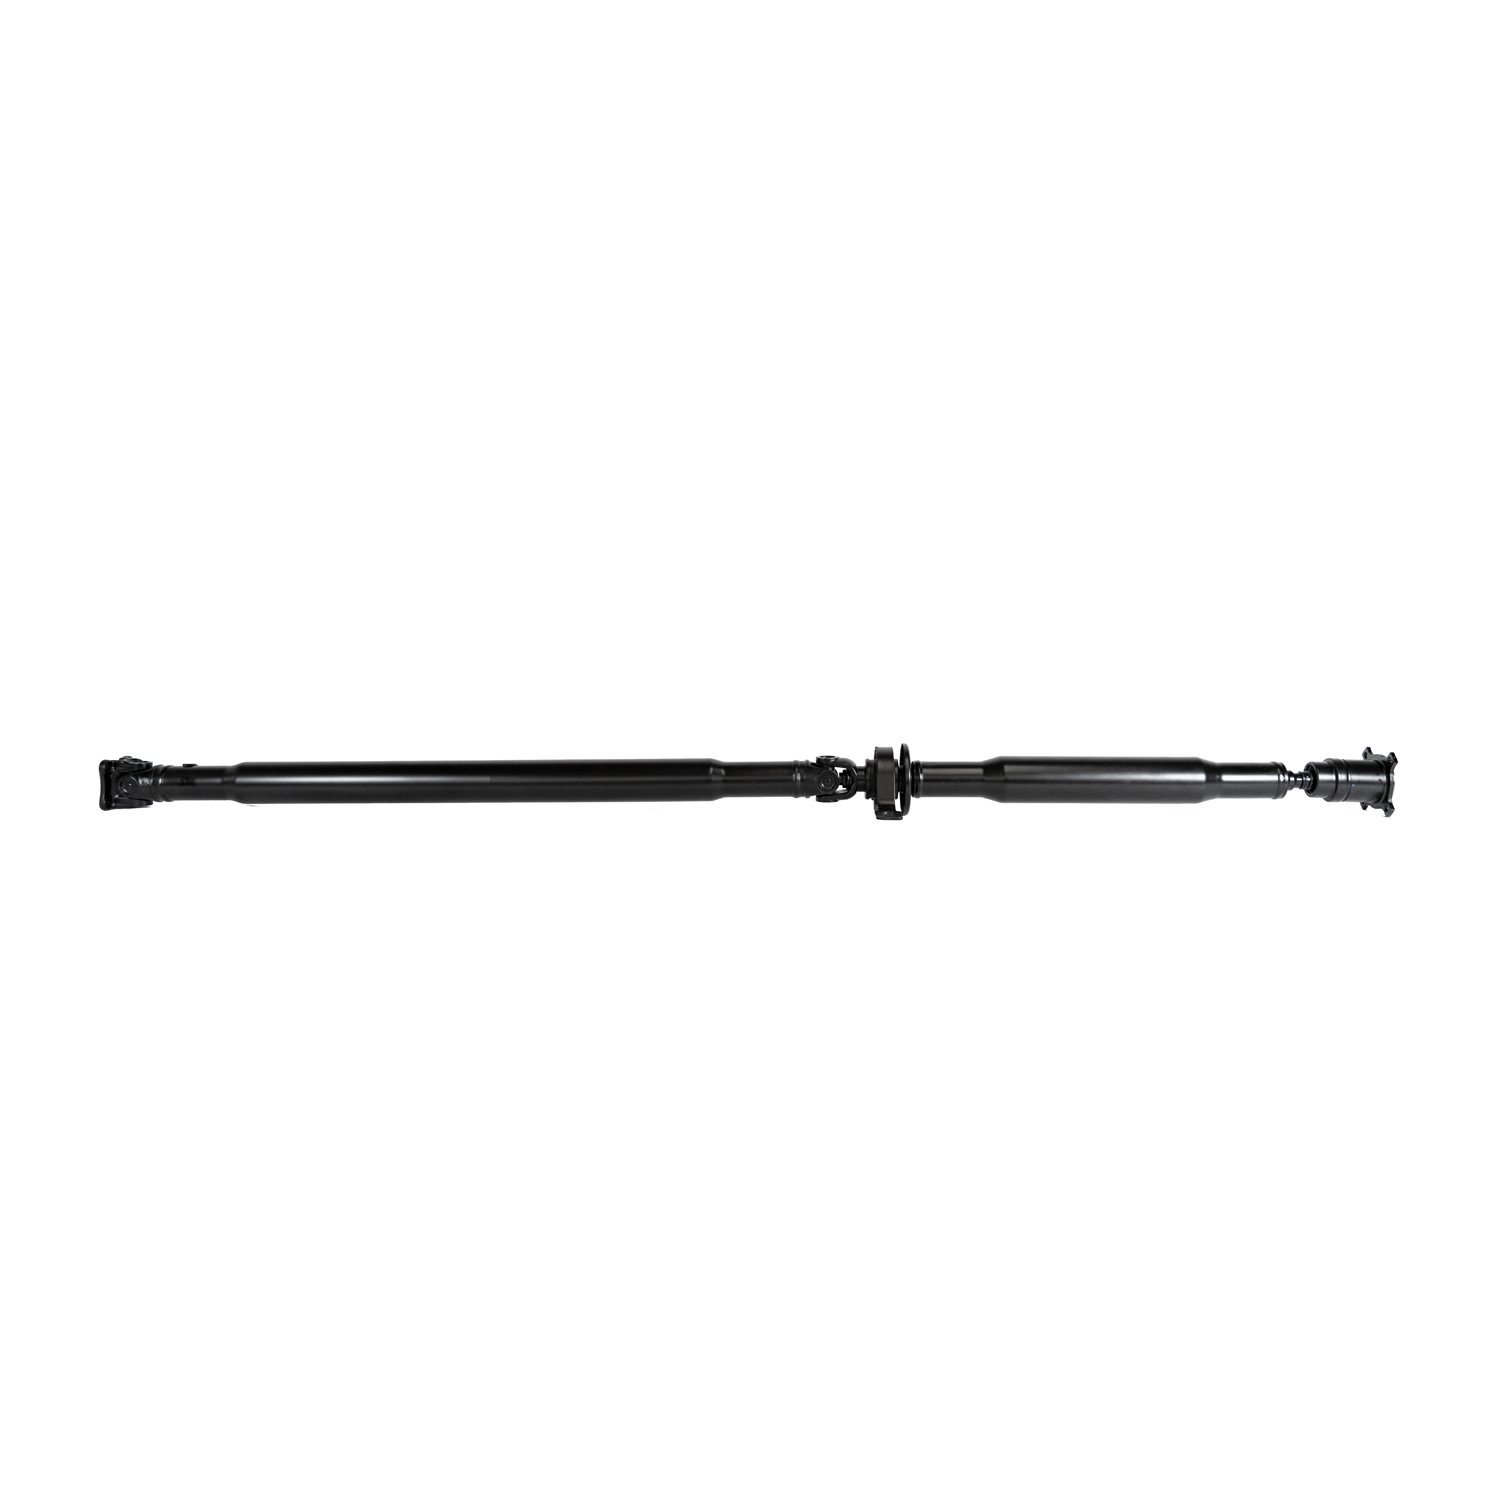 USA Standard 44653 Rear Driveshaft, For Ford Edge/Lincoln